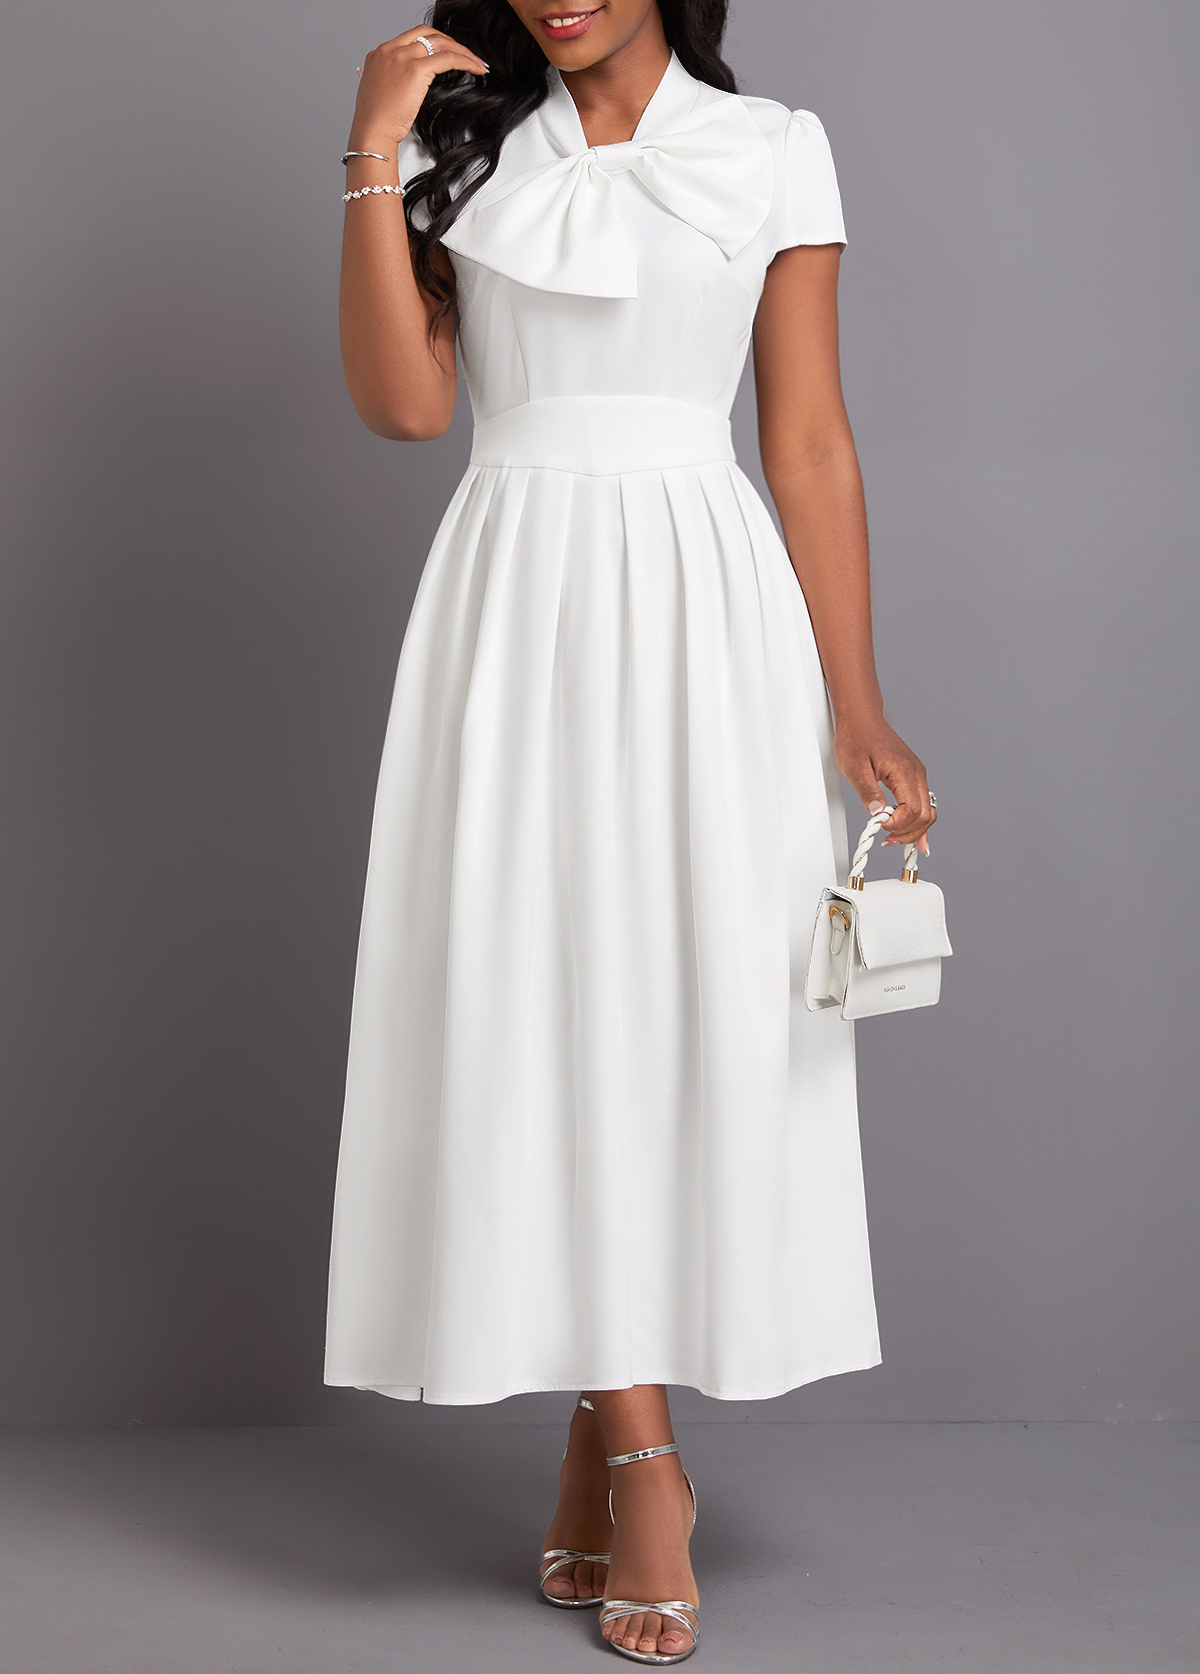 Bowknot White Short Sleeve Stand Collar Dress